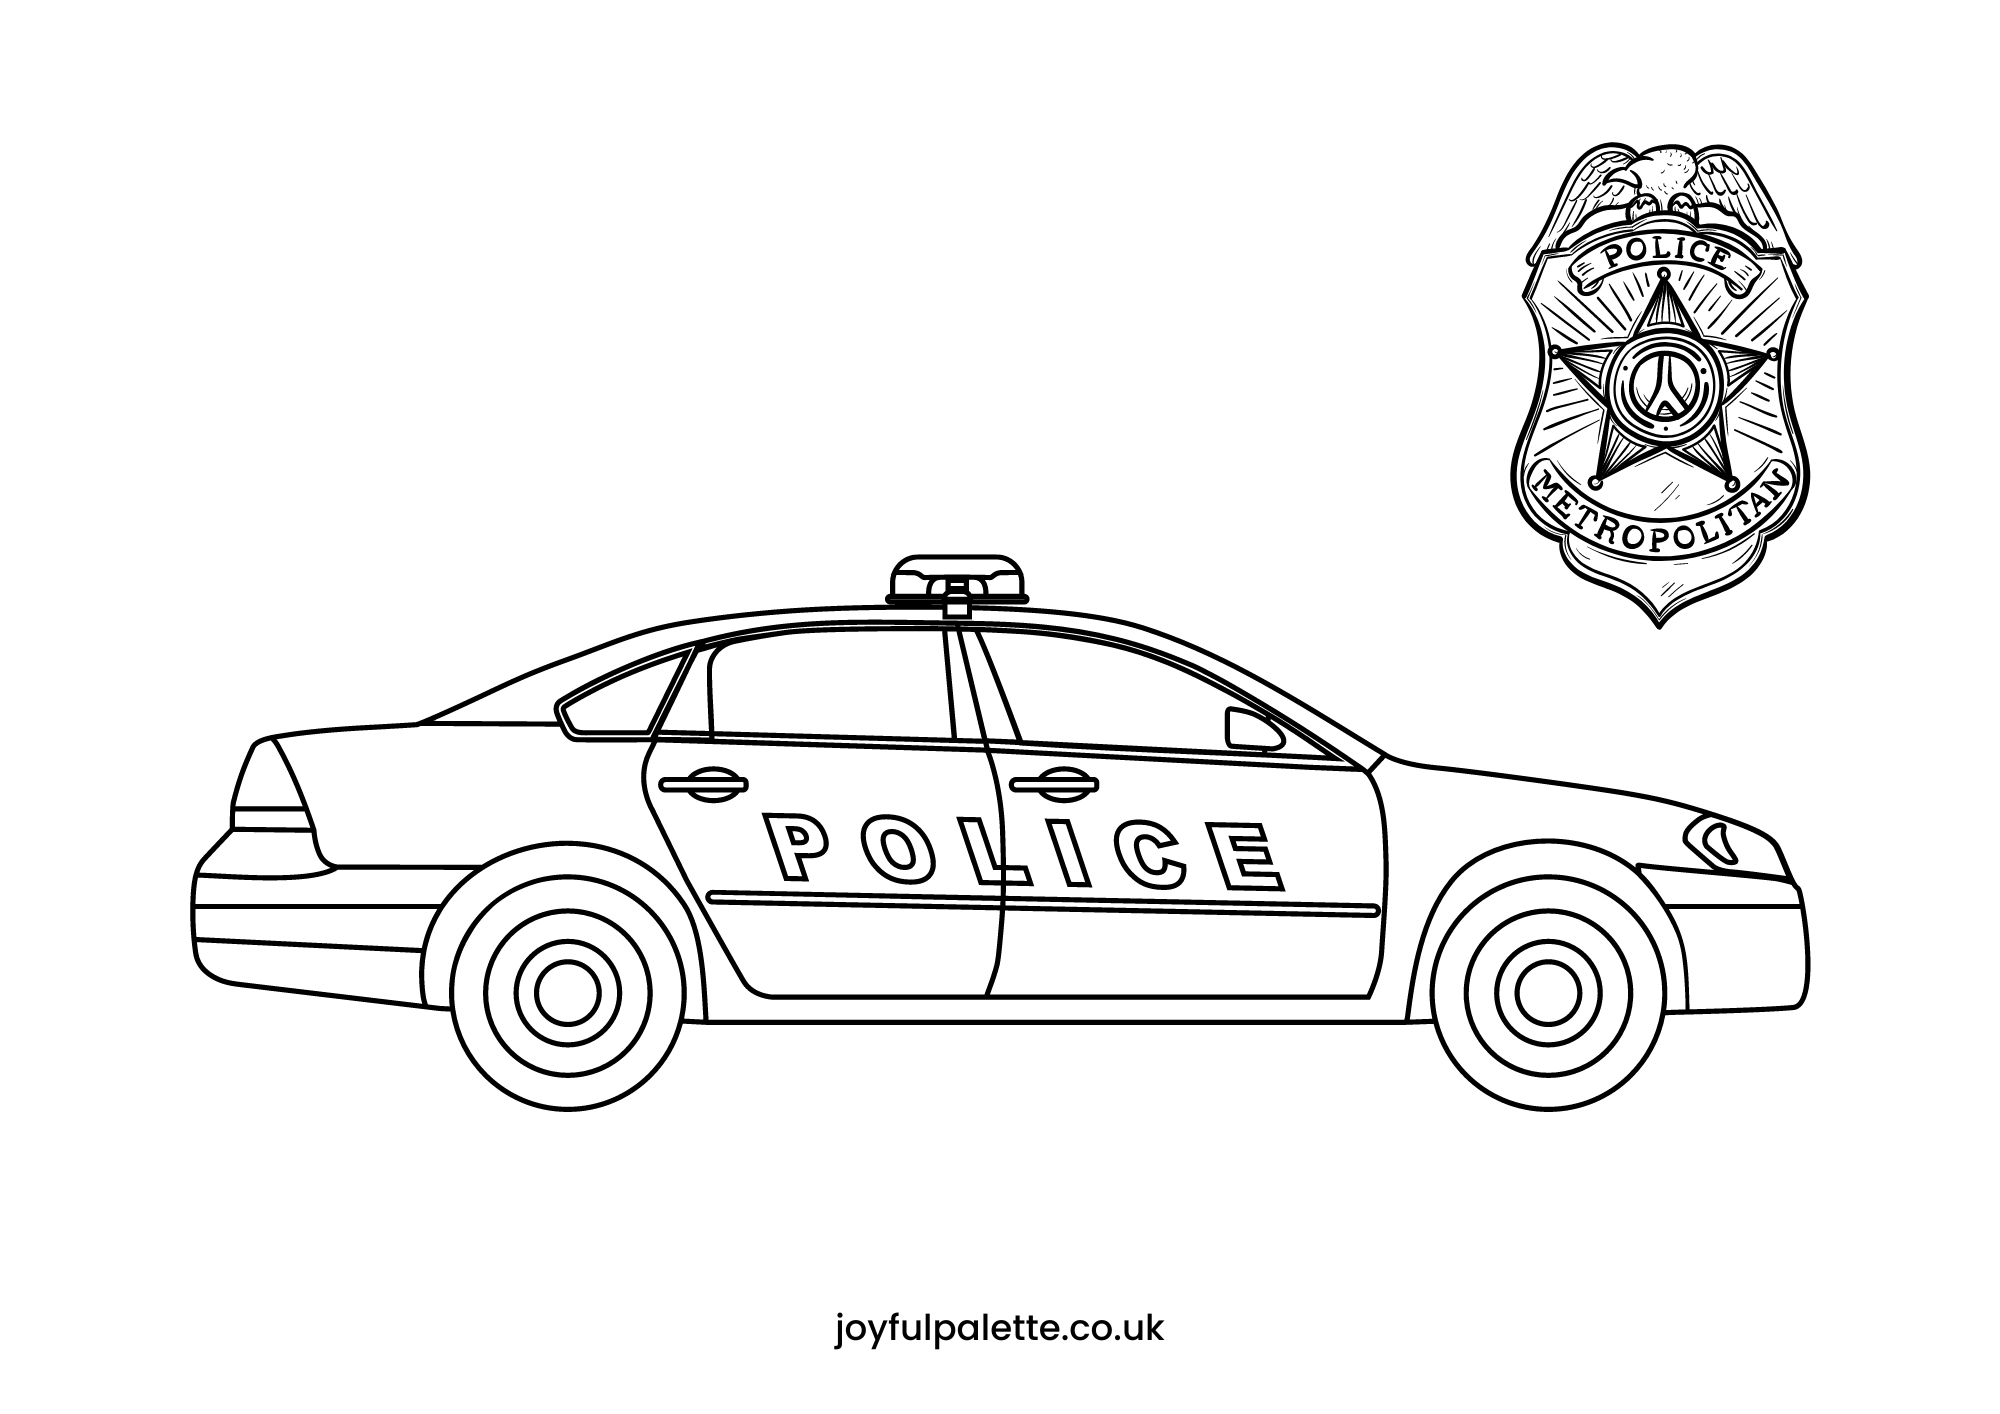 Detailed Police Badge and Vehicle Coloring Page